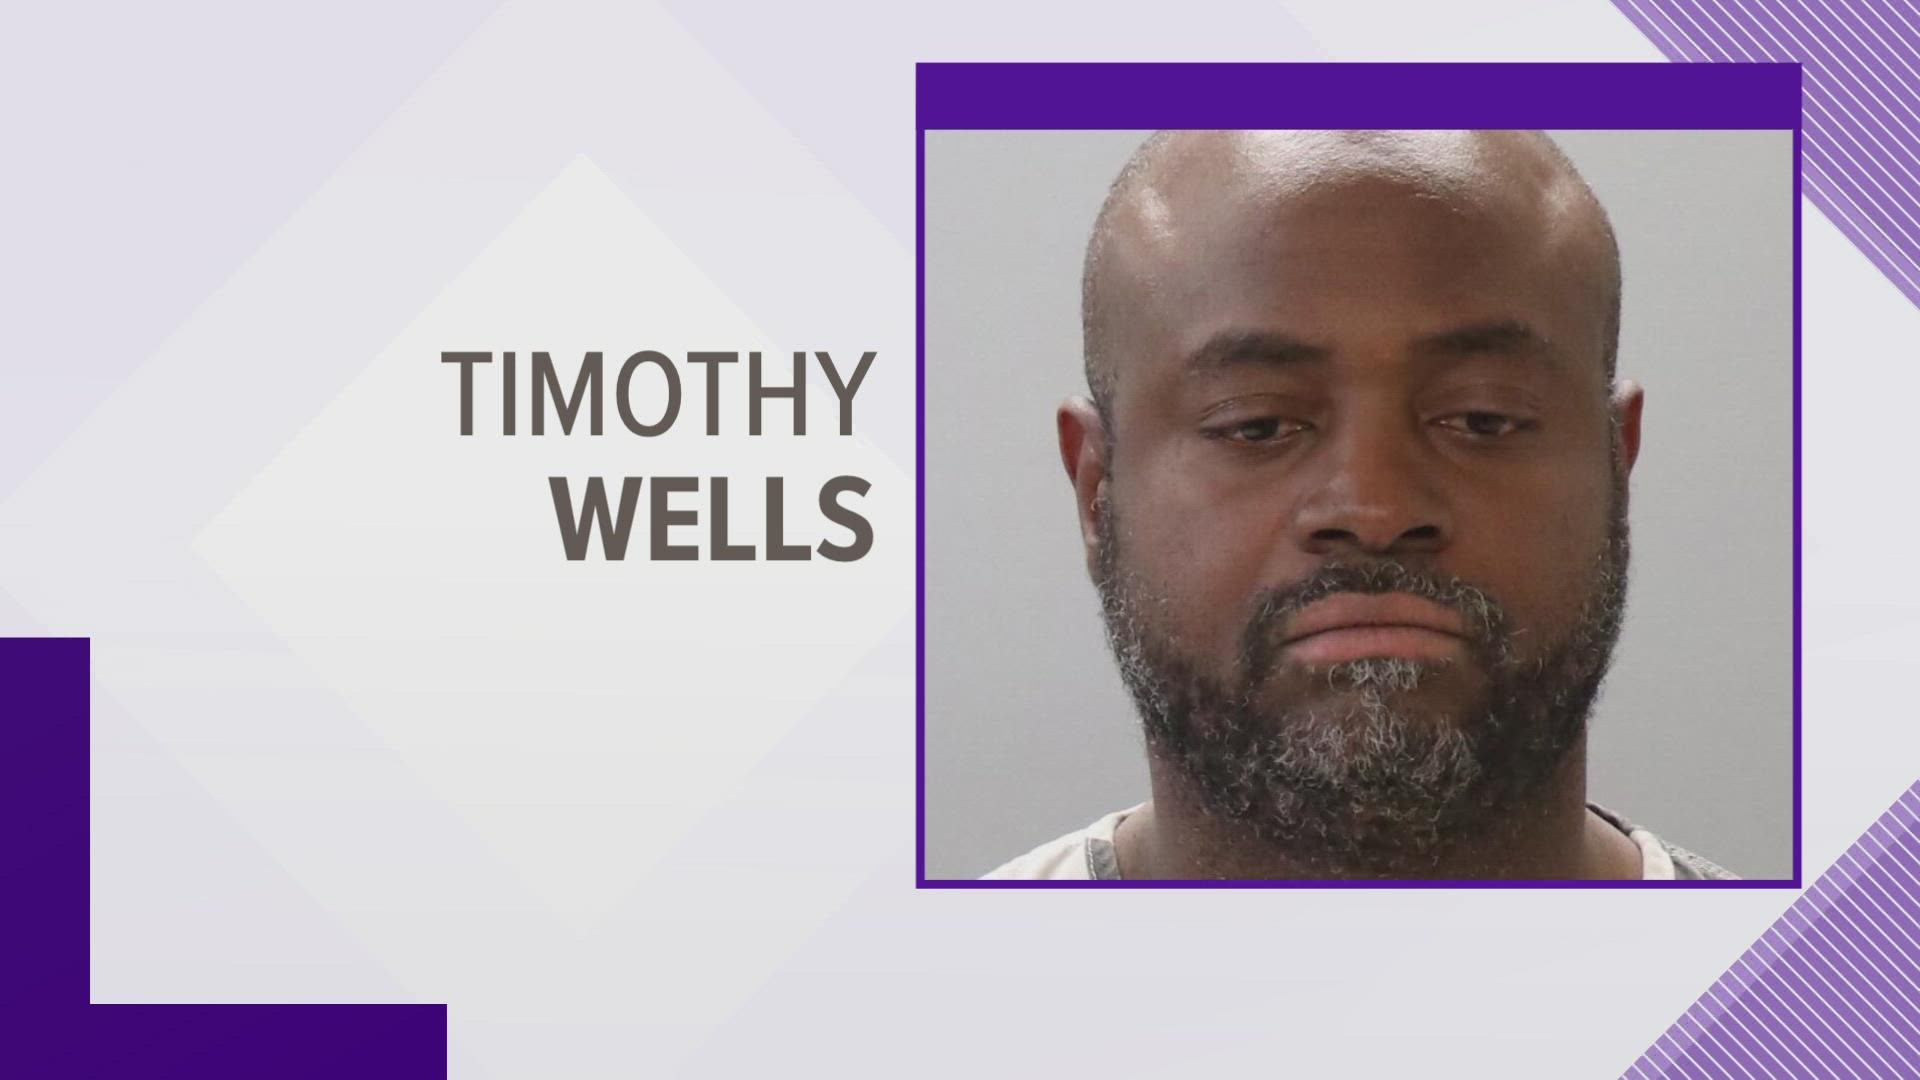 Timothy Wells told investigators his girlfriend committed suicide. He later changed his story and claimed he accidentally shot his girlfriend in the head.